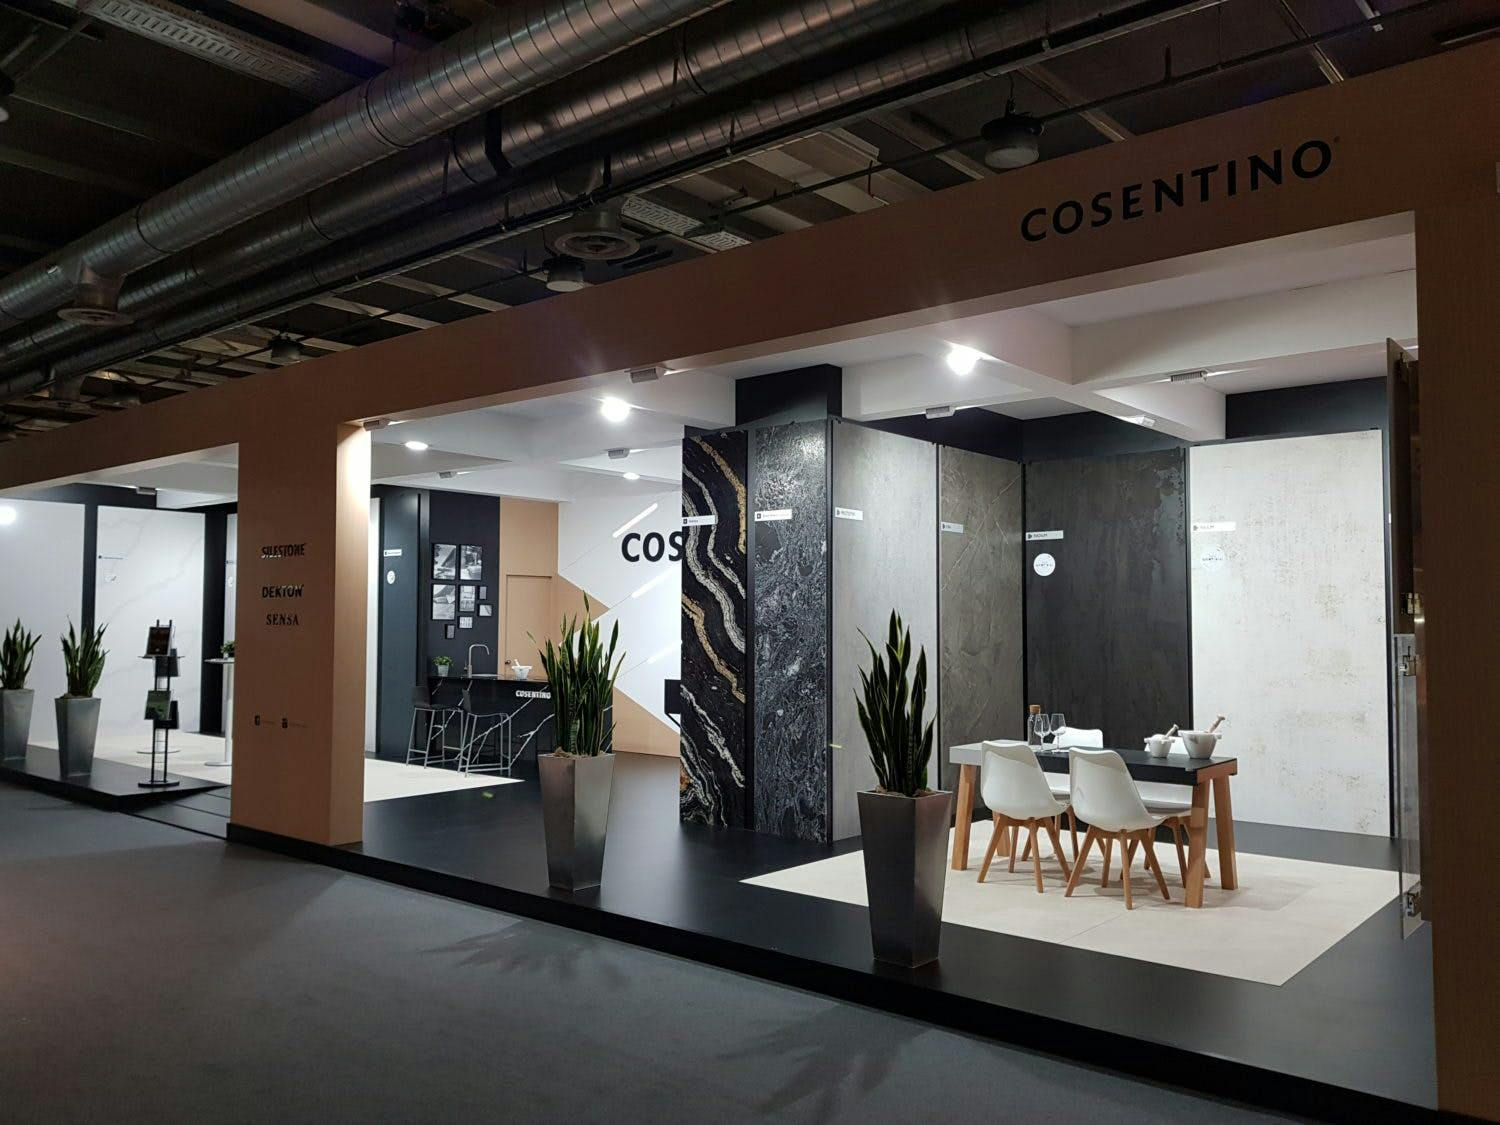 Image 31 of Cosentino stand in Swissbau 2018 1500x1125 3 in Cosentino presents its novelties at Swissbau and at IDS - Cosentino